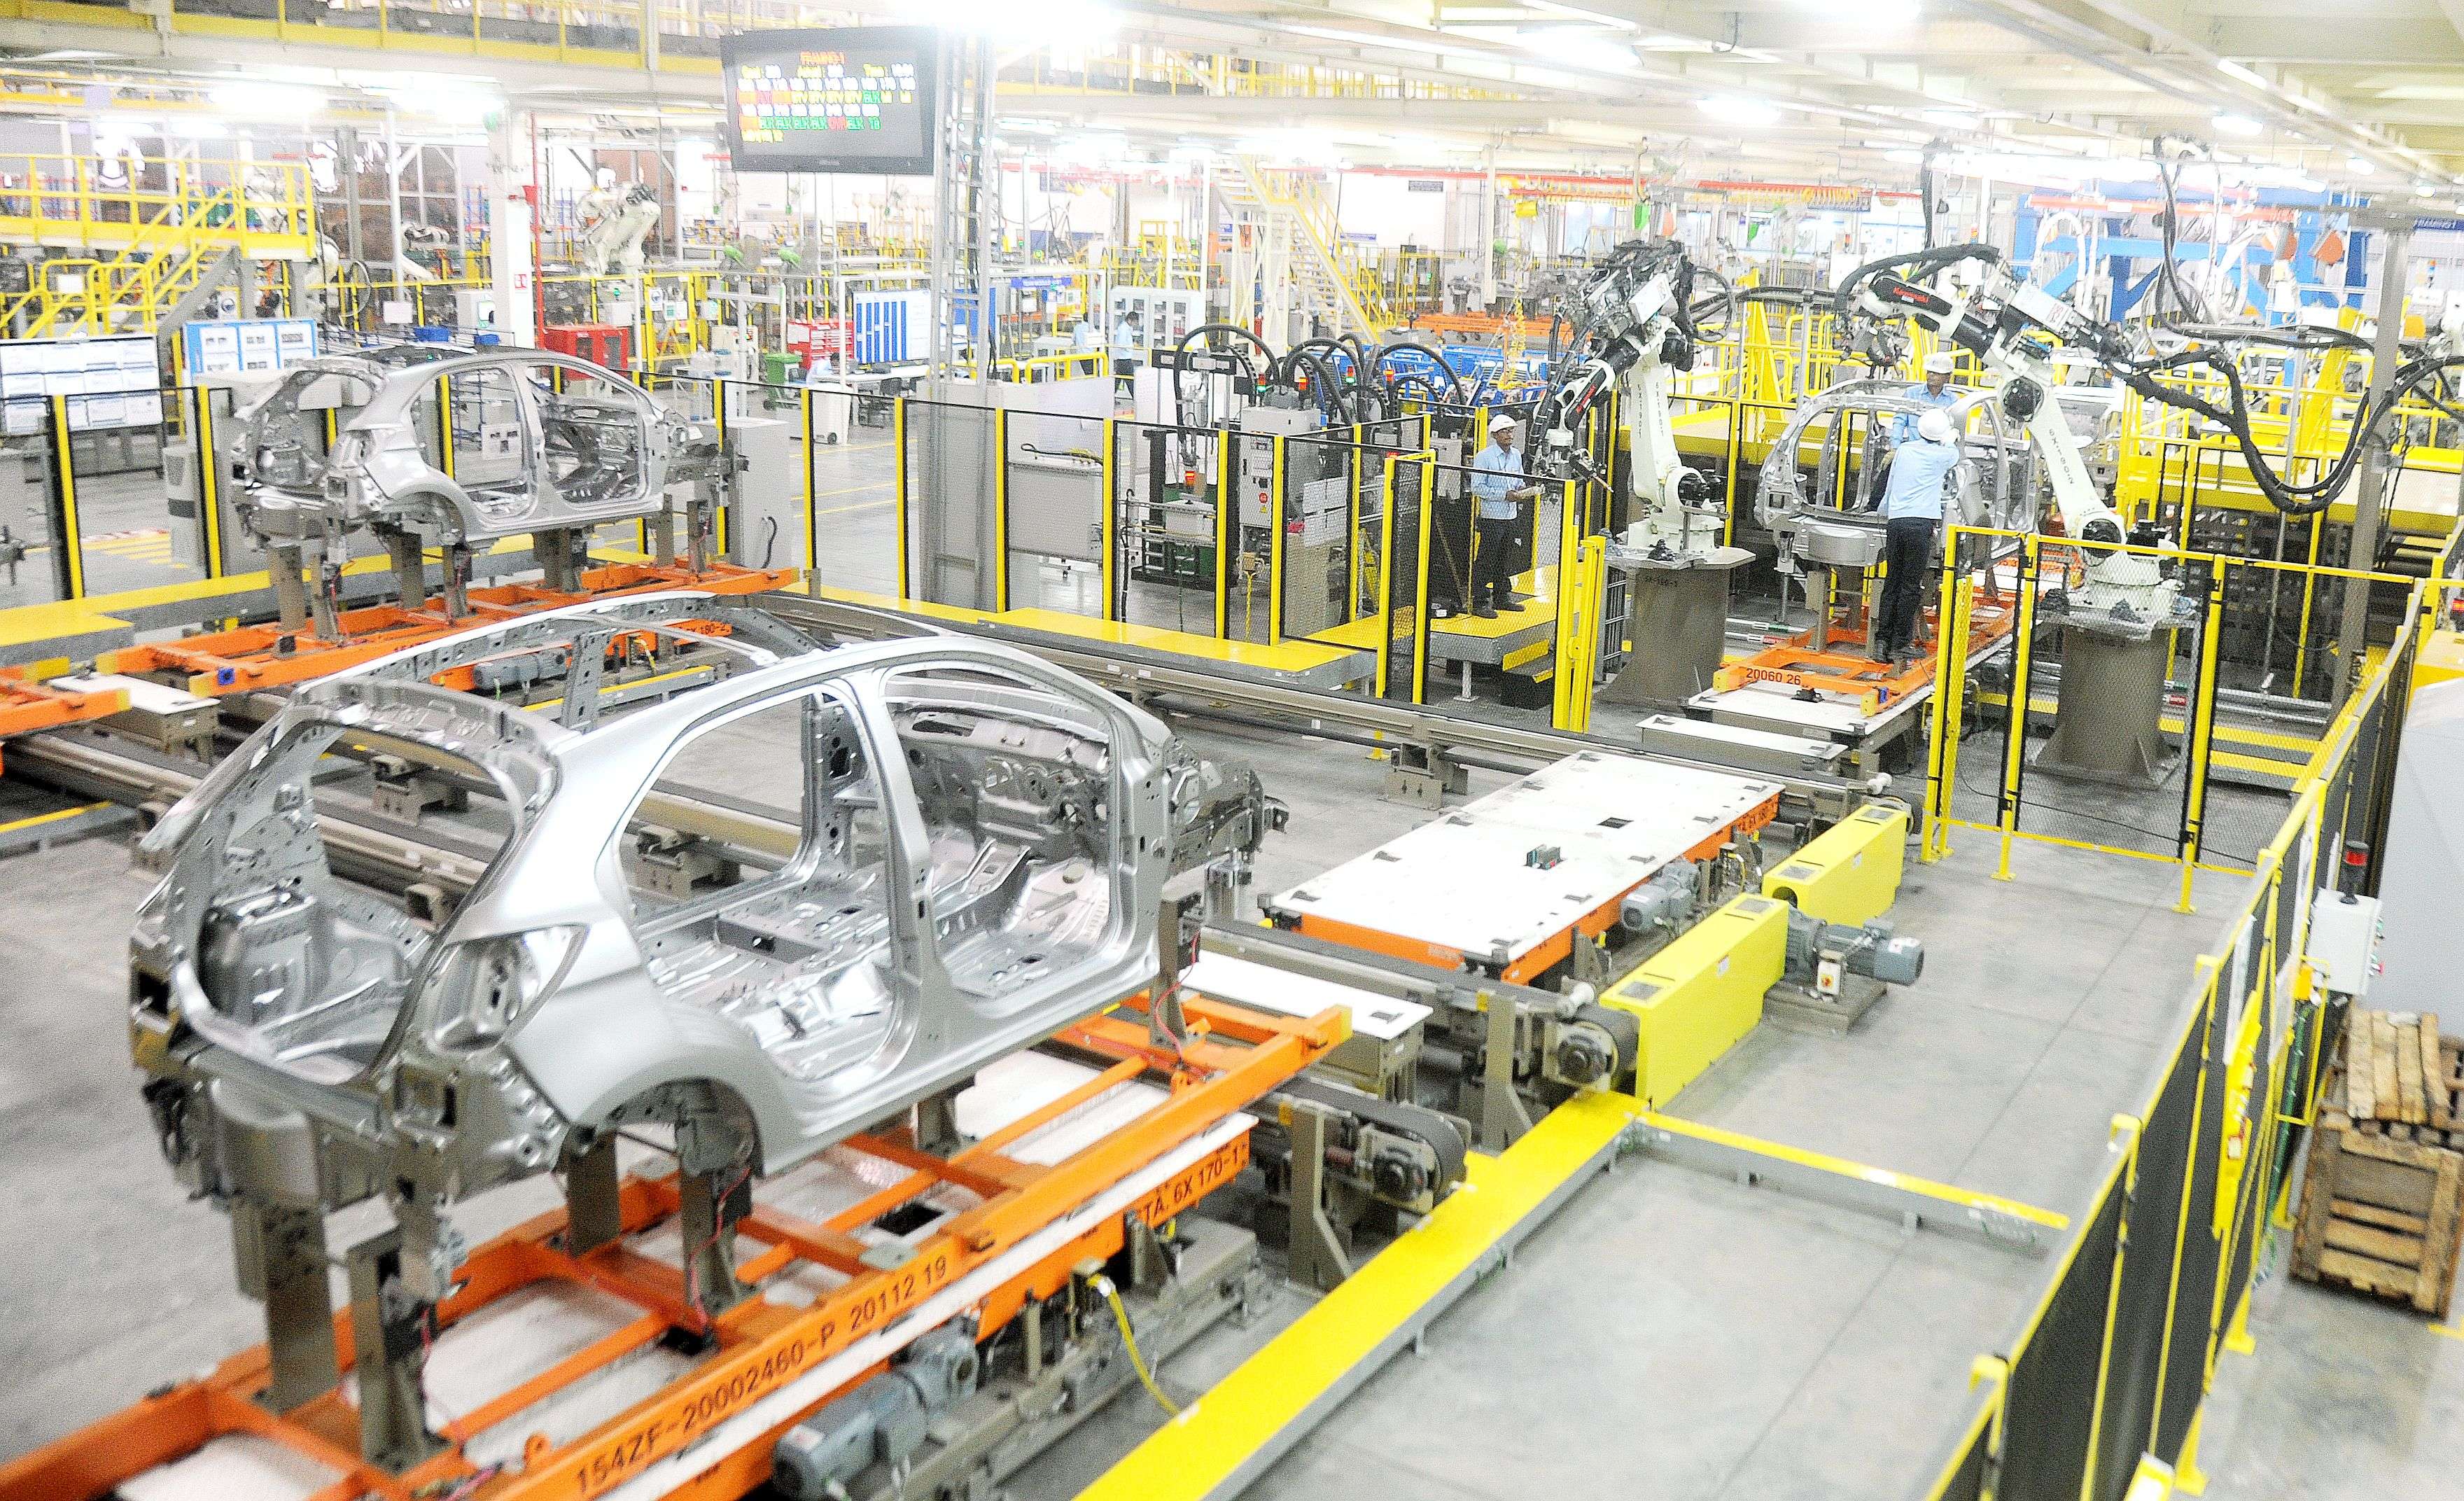 Nano failed but Gujarat succeeded in attracting many other firms. (Above) The Ford plant